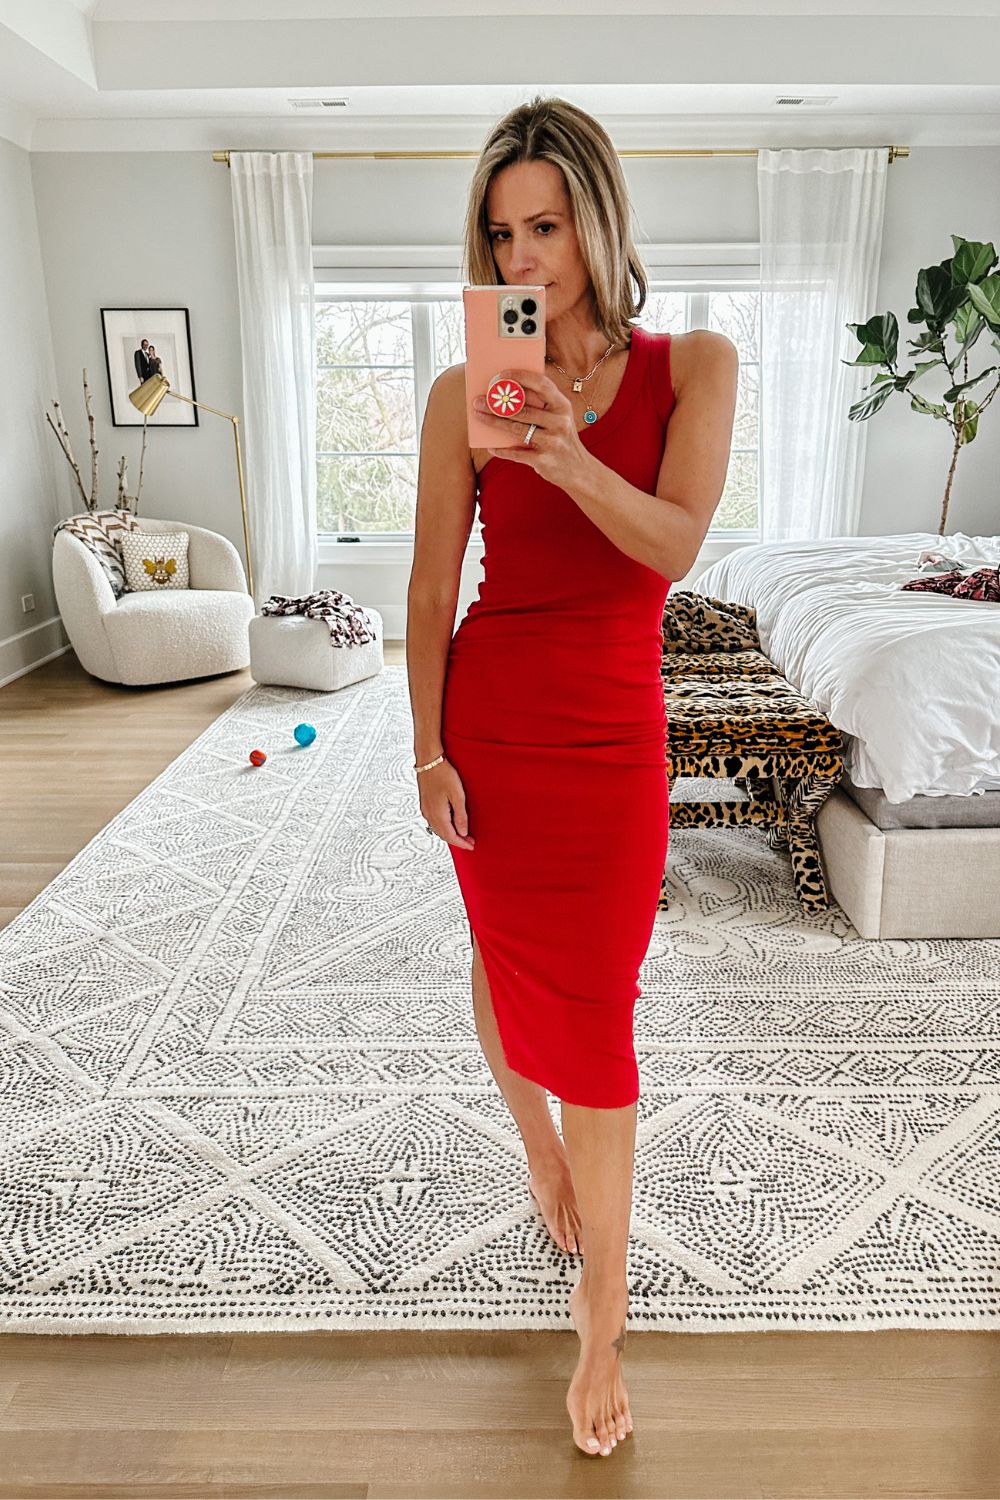 Suzanne wearing a ribbed one shoulder dress